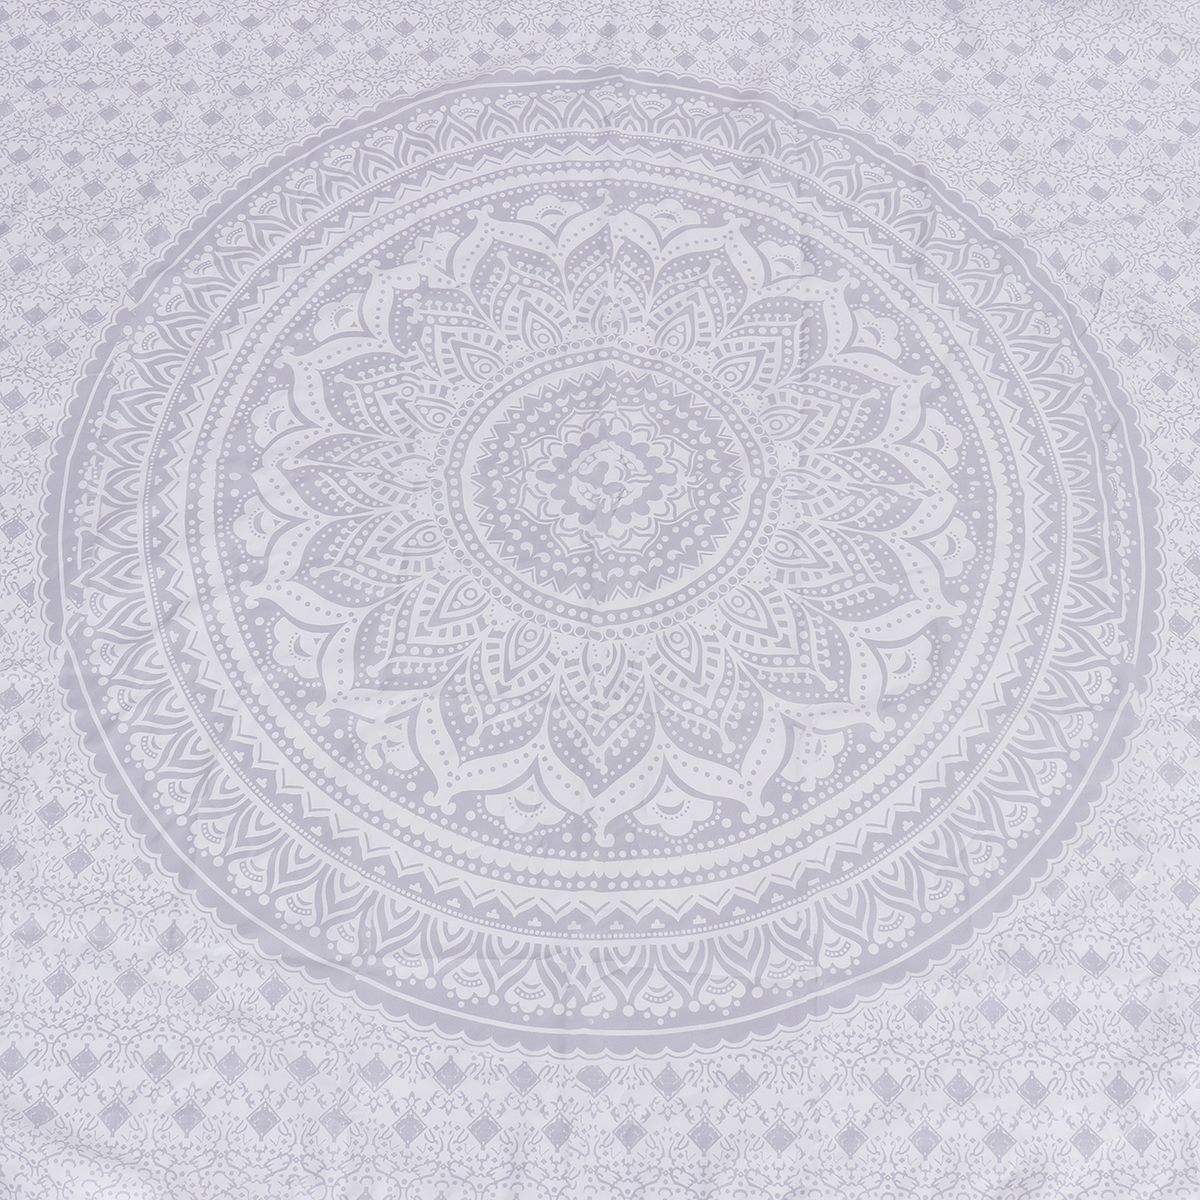 Indian-Mandala-Tapestry-Bohemian-Hippie-Wall-Hanging-Decor-Queen-Bedspread-Throw-1522841